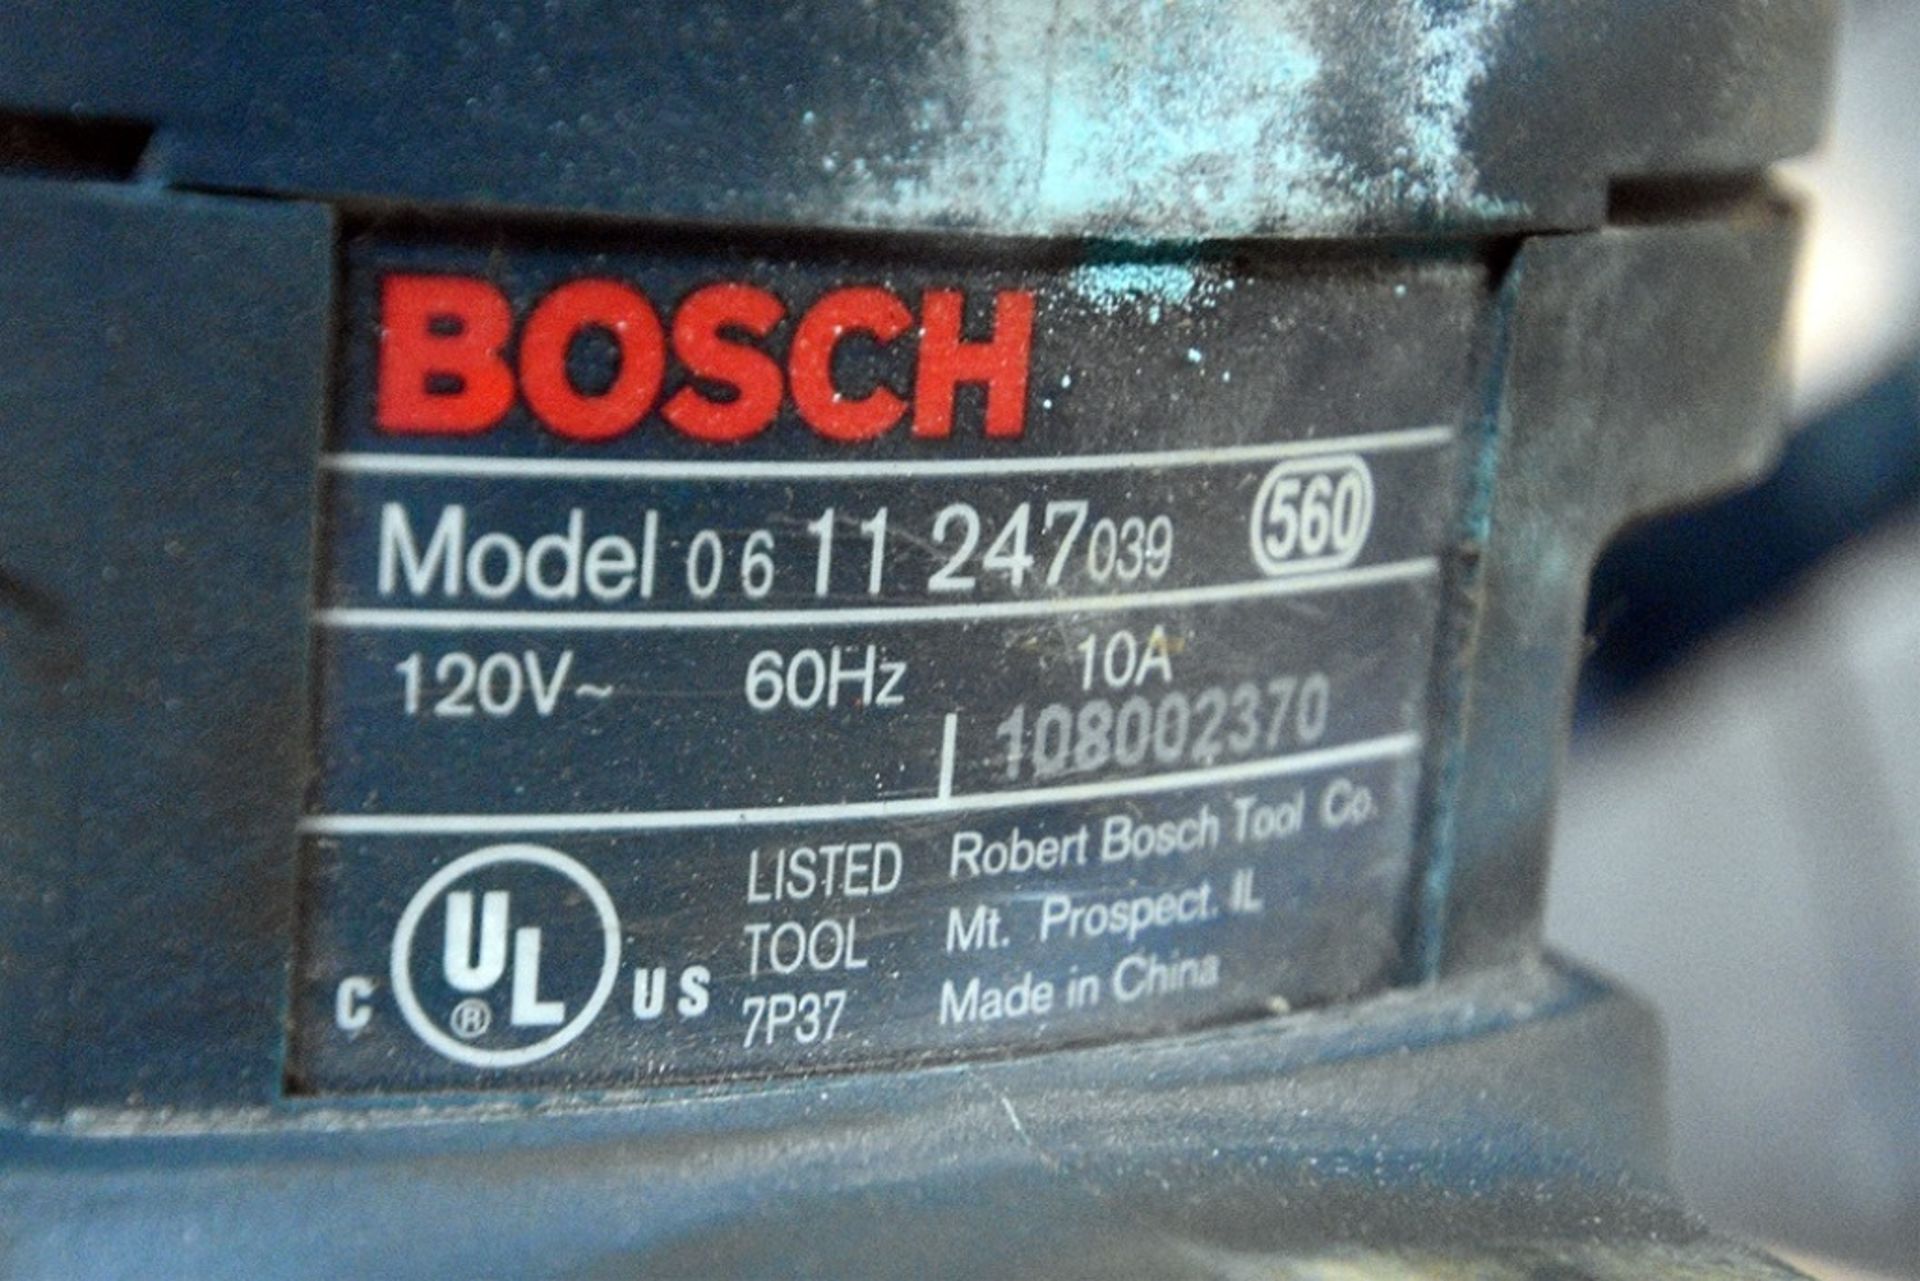 Bosch BoschHammer Model 11247 1-9/16" Corded Combination Hammer w/ Case and Bits - Image 3 of 4